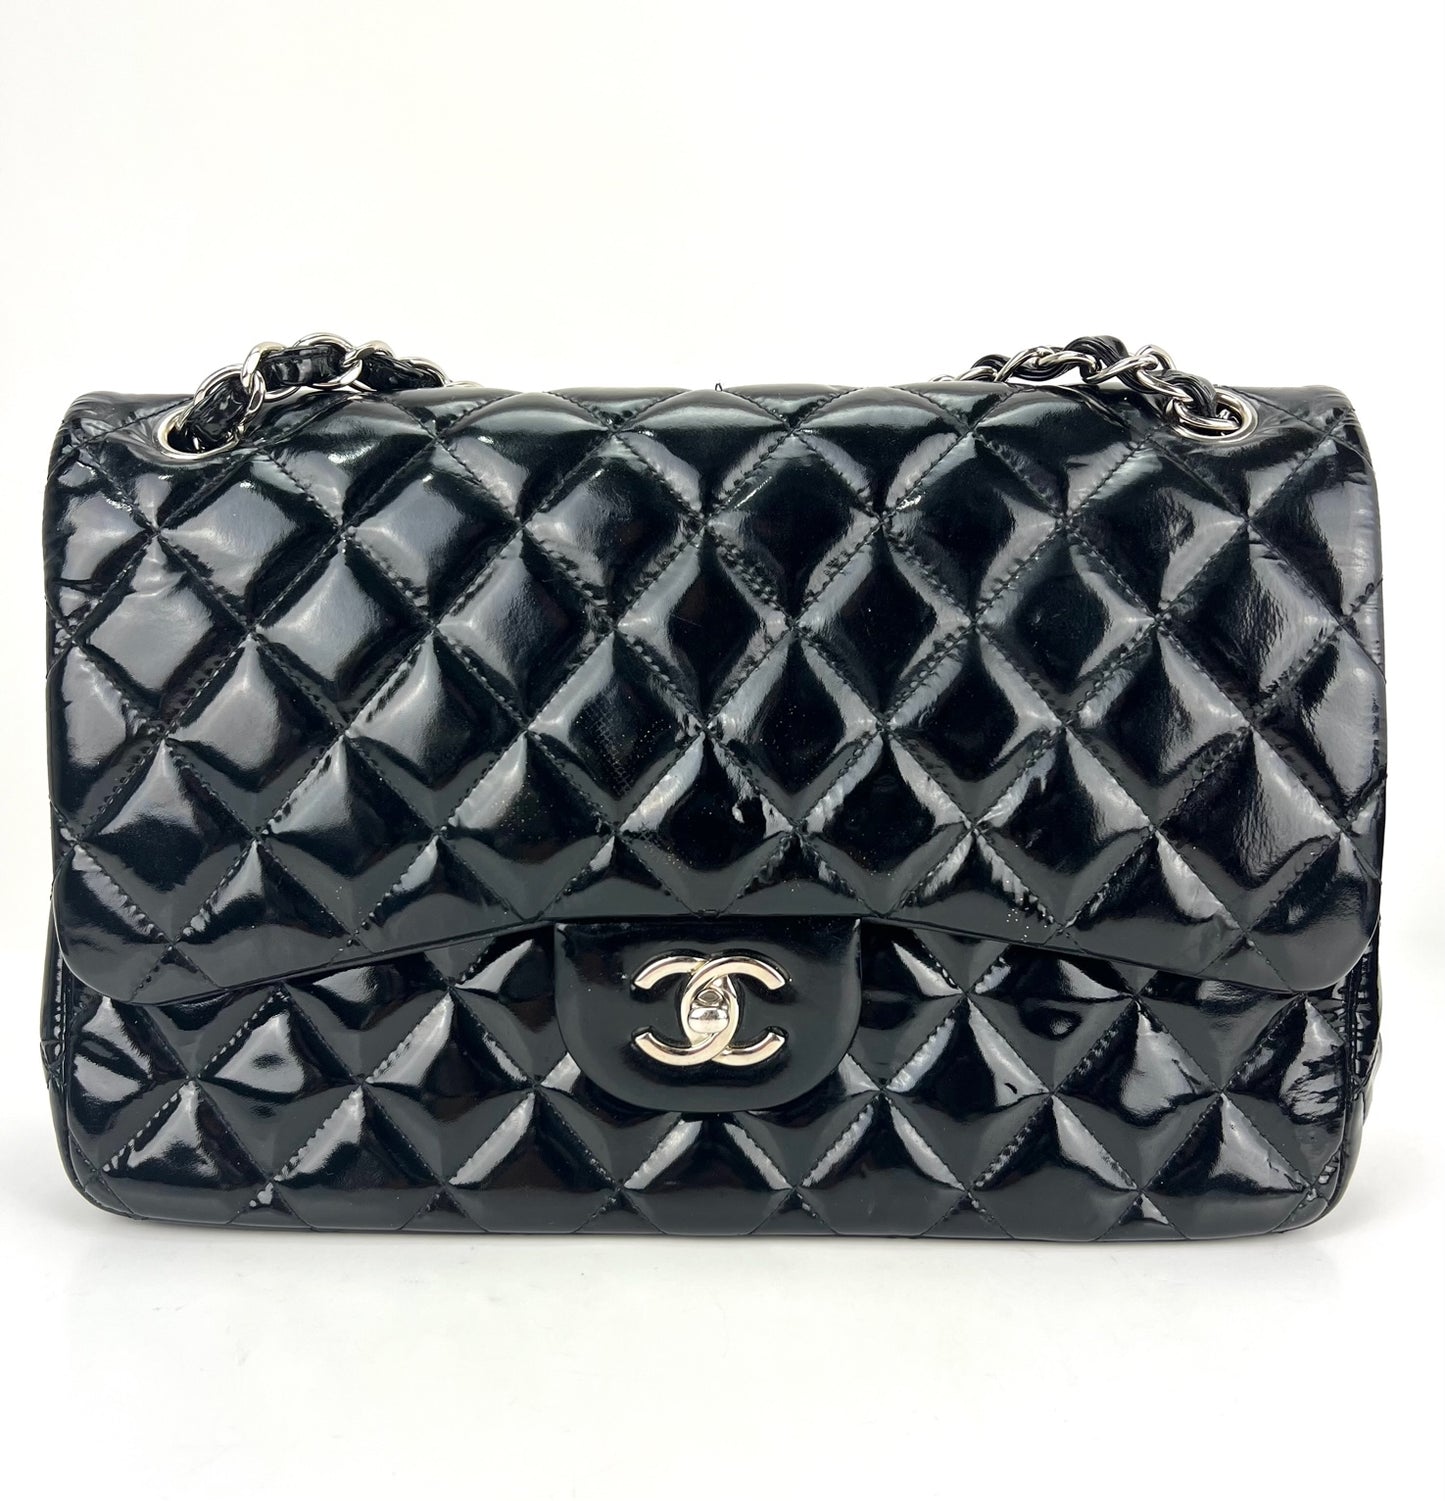 2008 Chanel Classic Jumbo Quilted Patent Leather Rare Olive Green